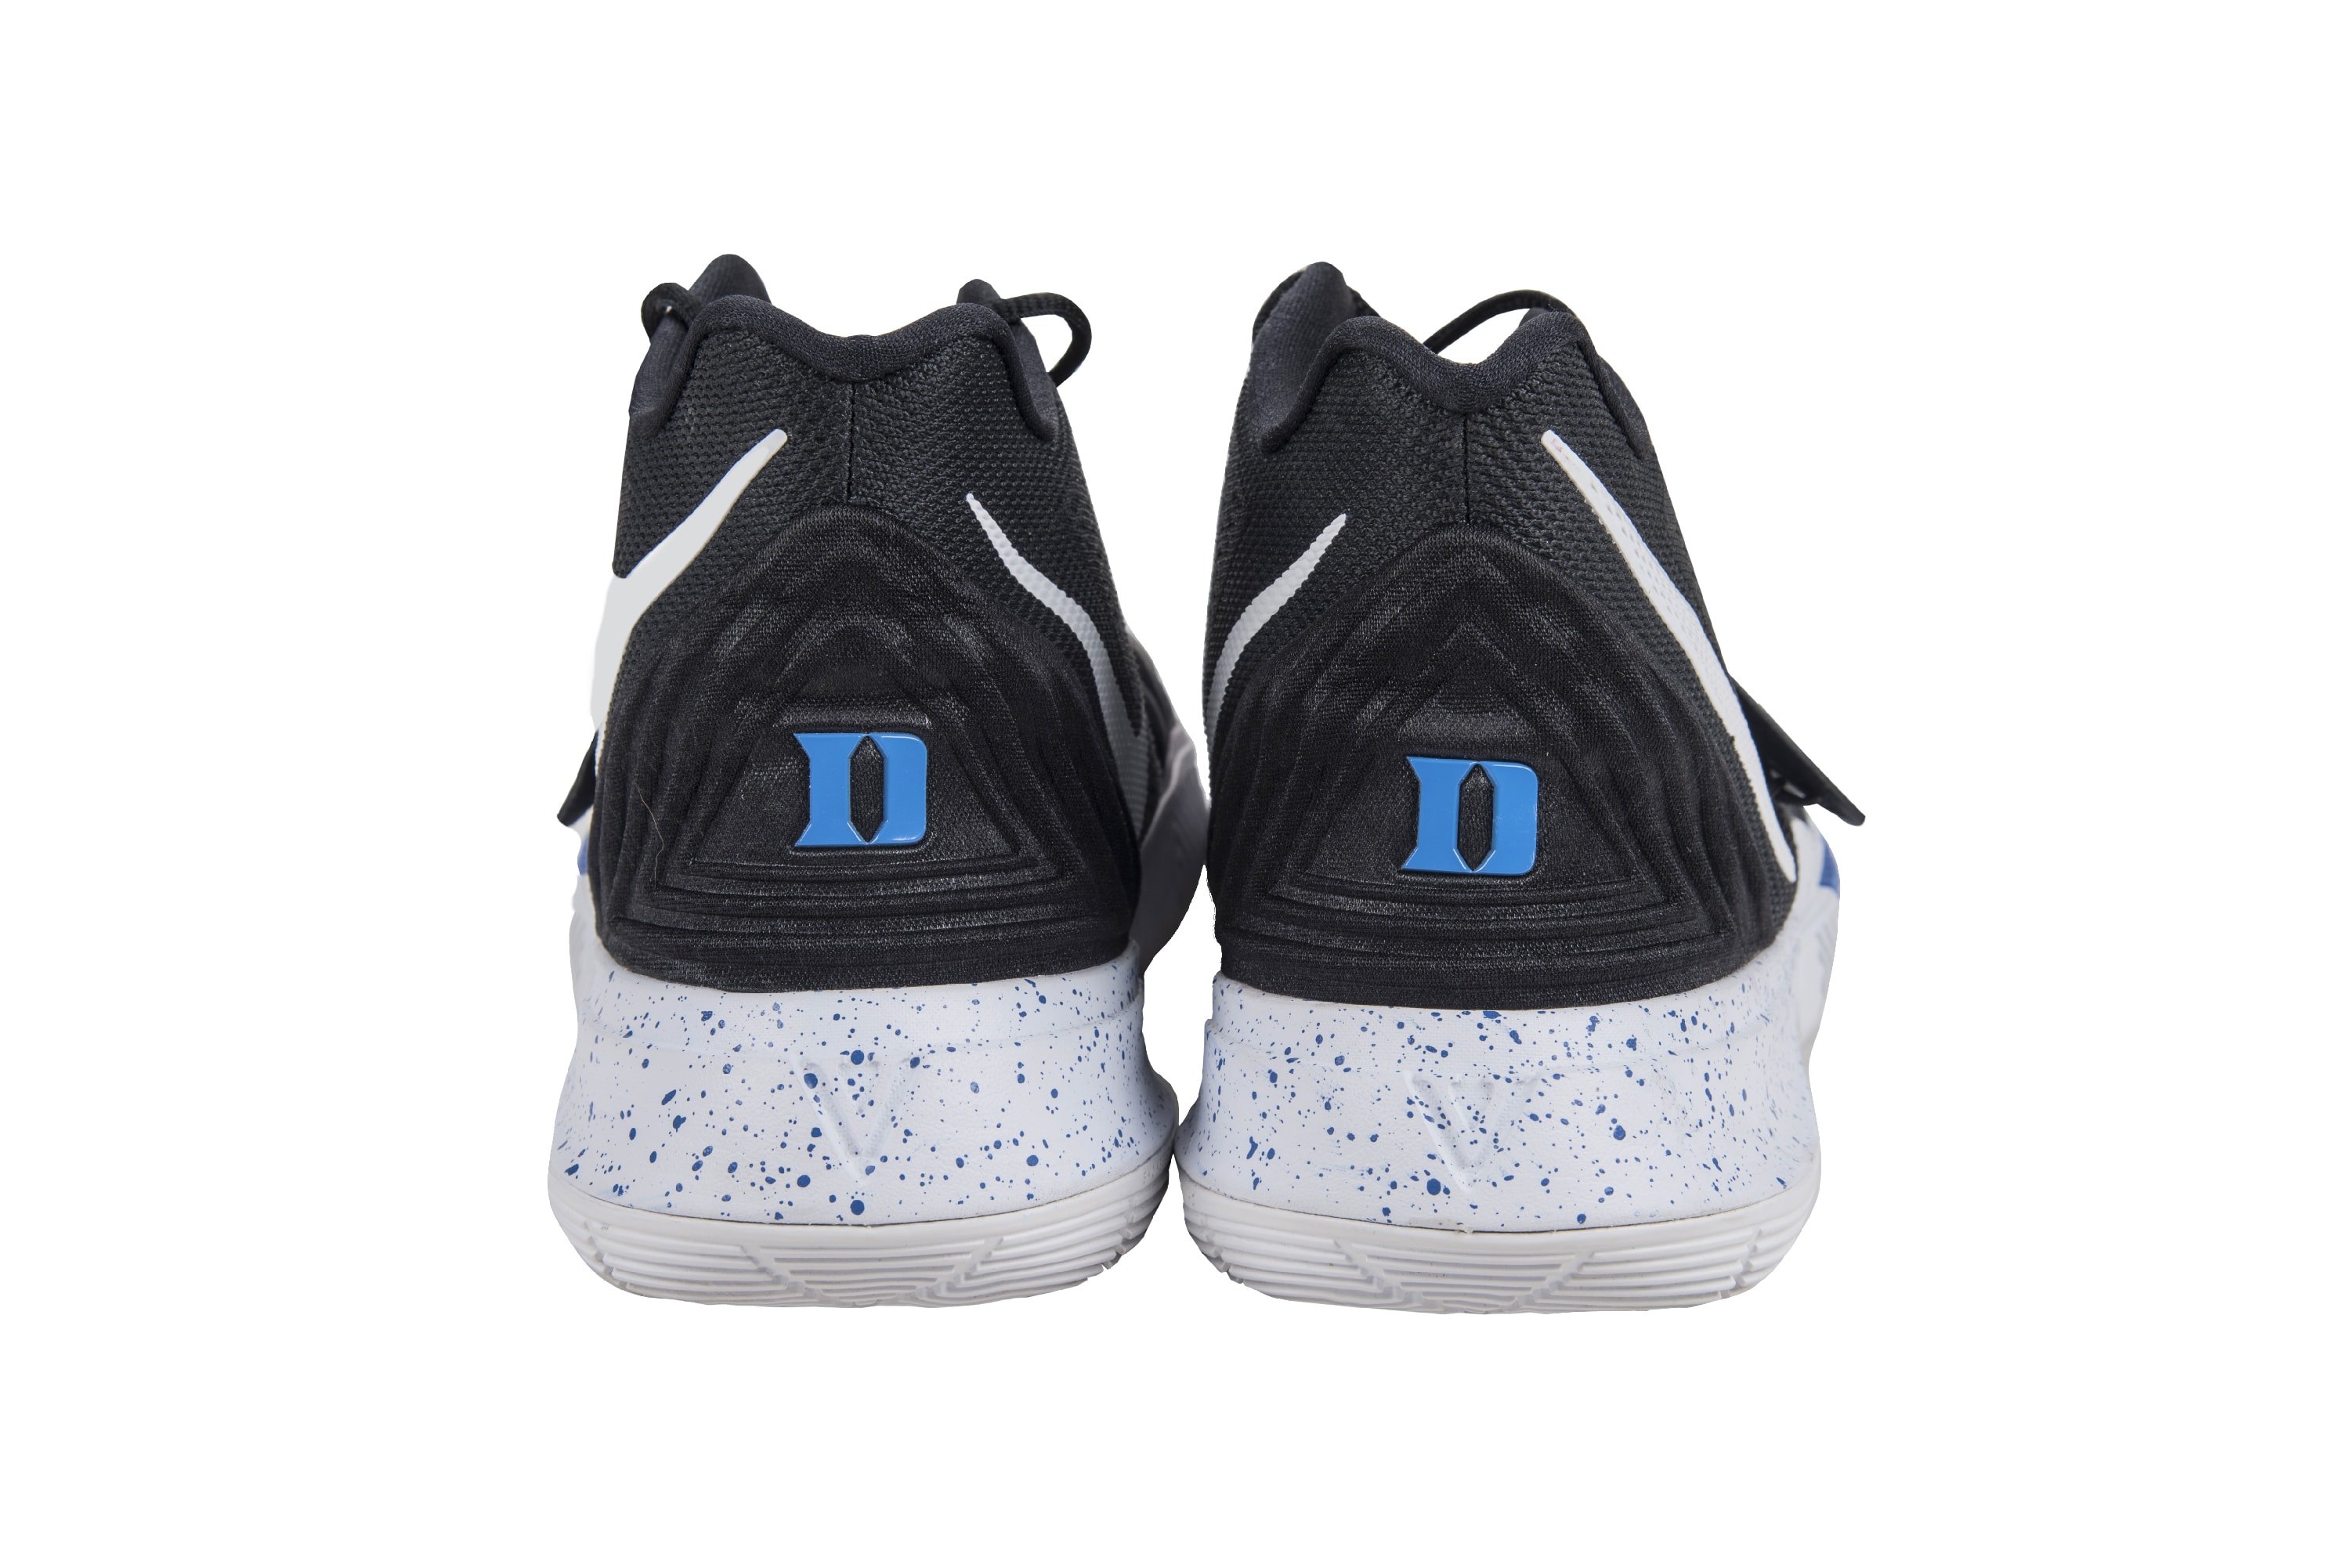 Zion Williamson Kyrie 5 Auctioned Off for Nearly 20000 USD Duke blue devils NCAA college basketball